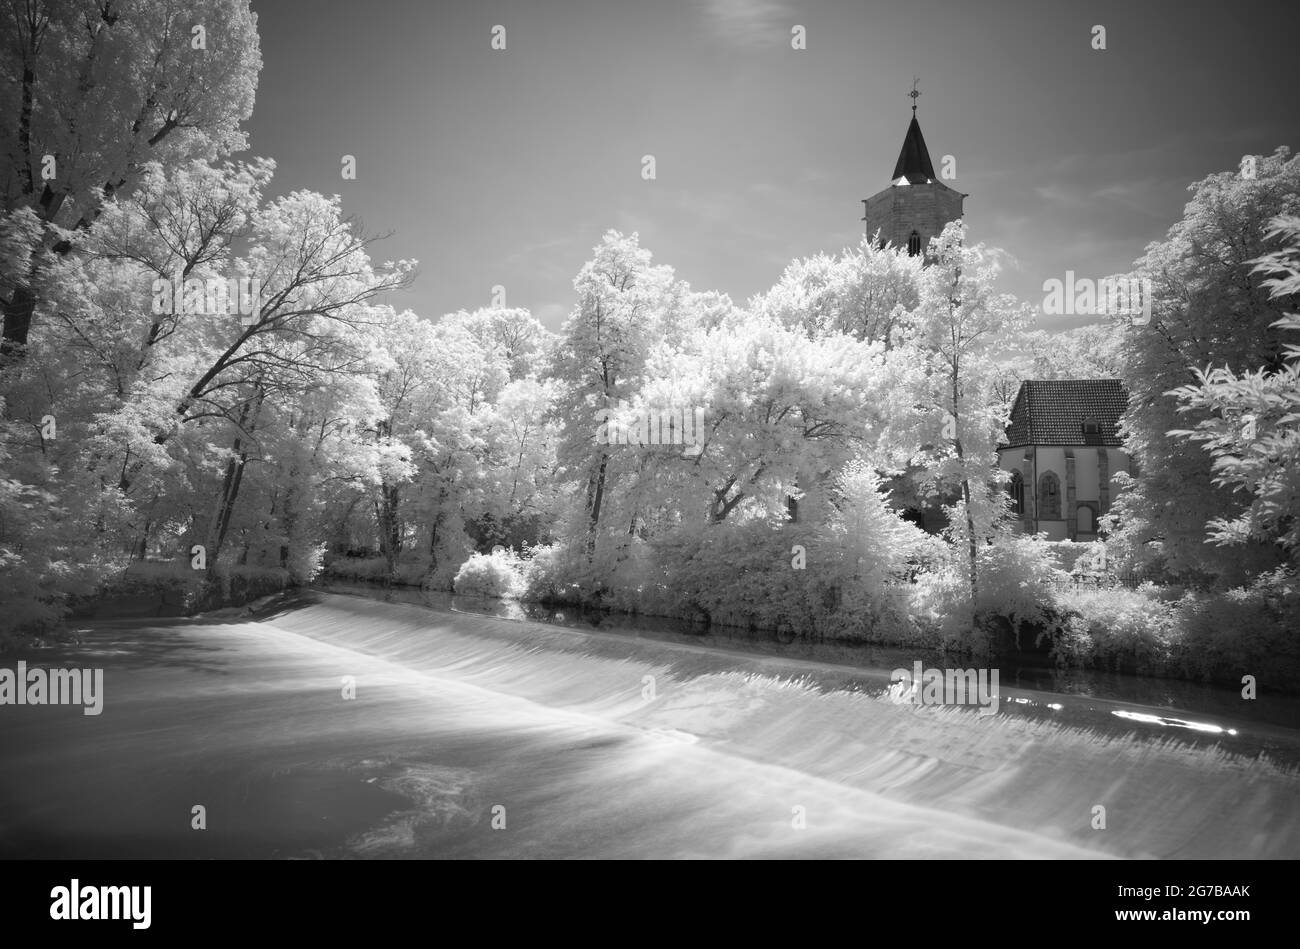 Infrared image, barrage of the river Rems, floodplain, Nikollauskirche behind, Waiblingen, Baden-Wuerttemberg, Germany Stock Photo